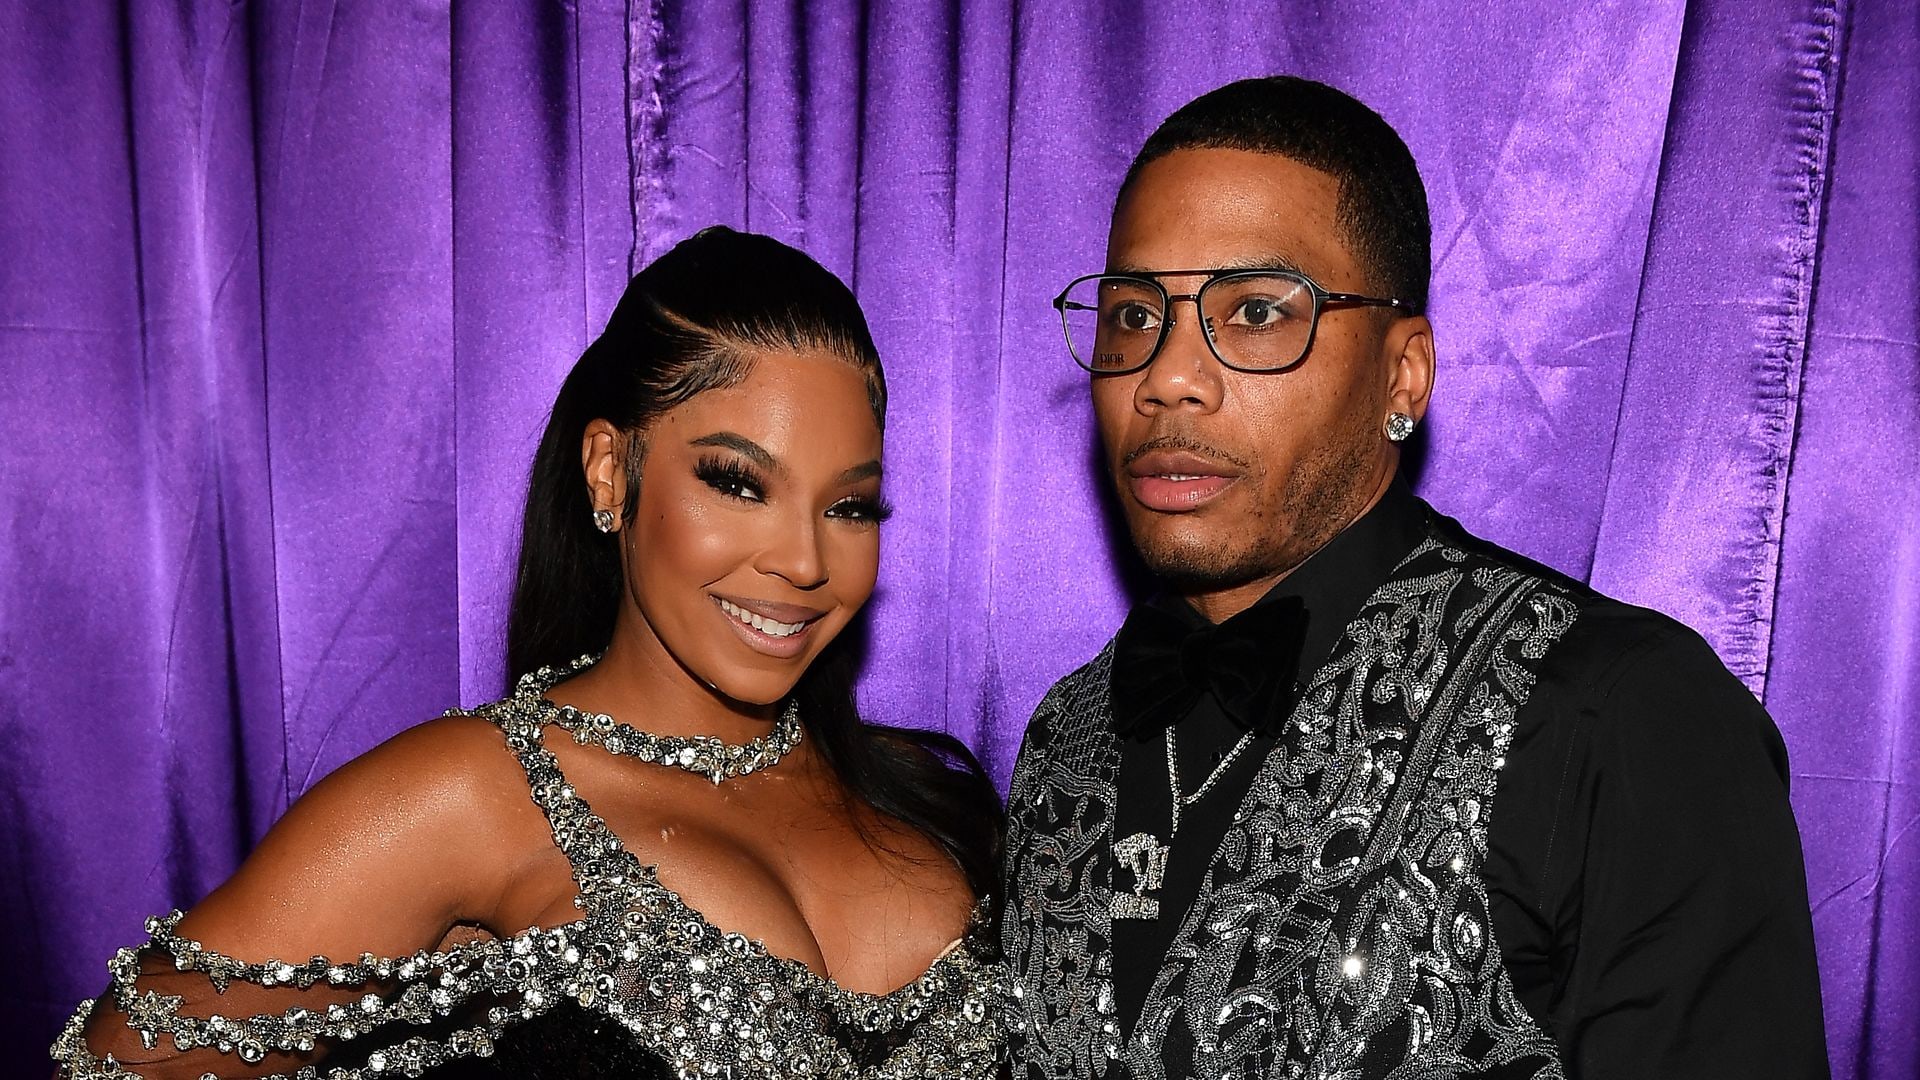 Ashanti and Nelly attend 3rd Annual Birthday Ball for Quality Control CEO Pierre "P" Thomas at The Fox Theatre on June 08, 2023 in Atlanta, Georgia